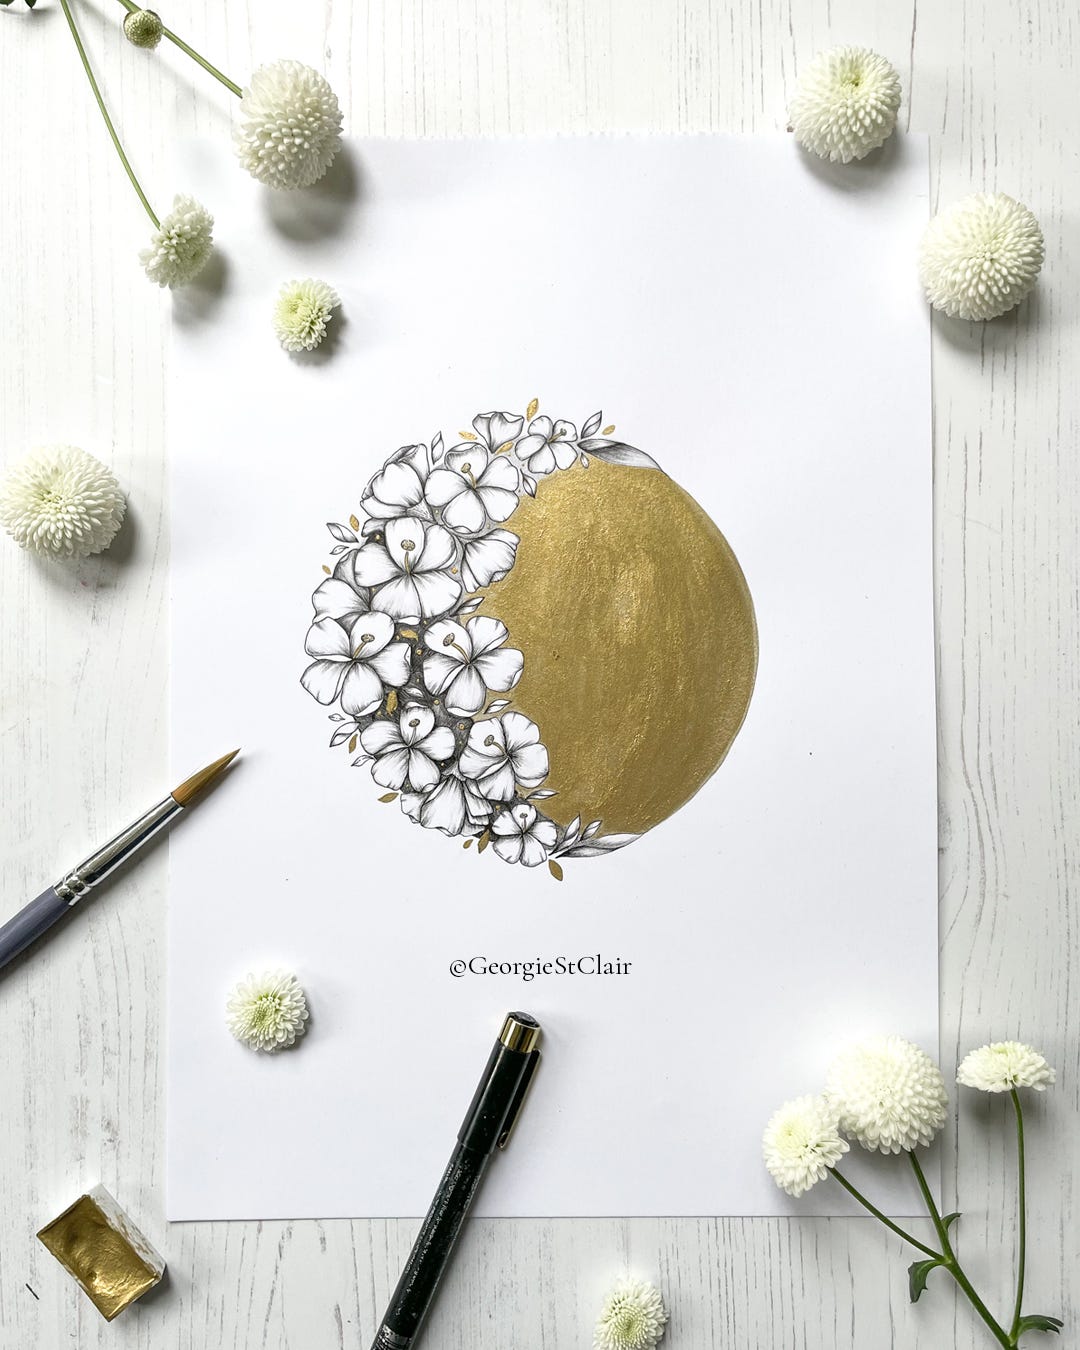 Botanical pen ank ink drawing of Spring blossom with gold watercolour metallic paint